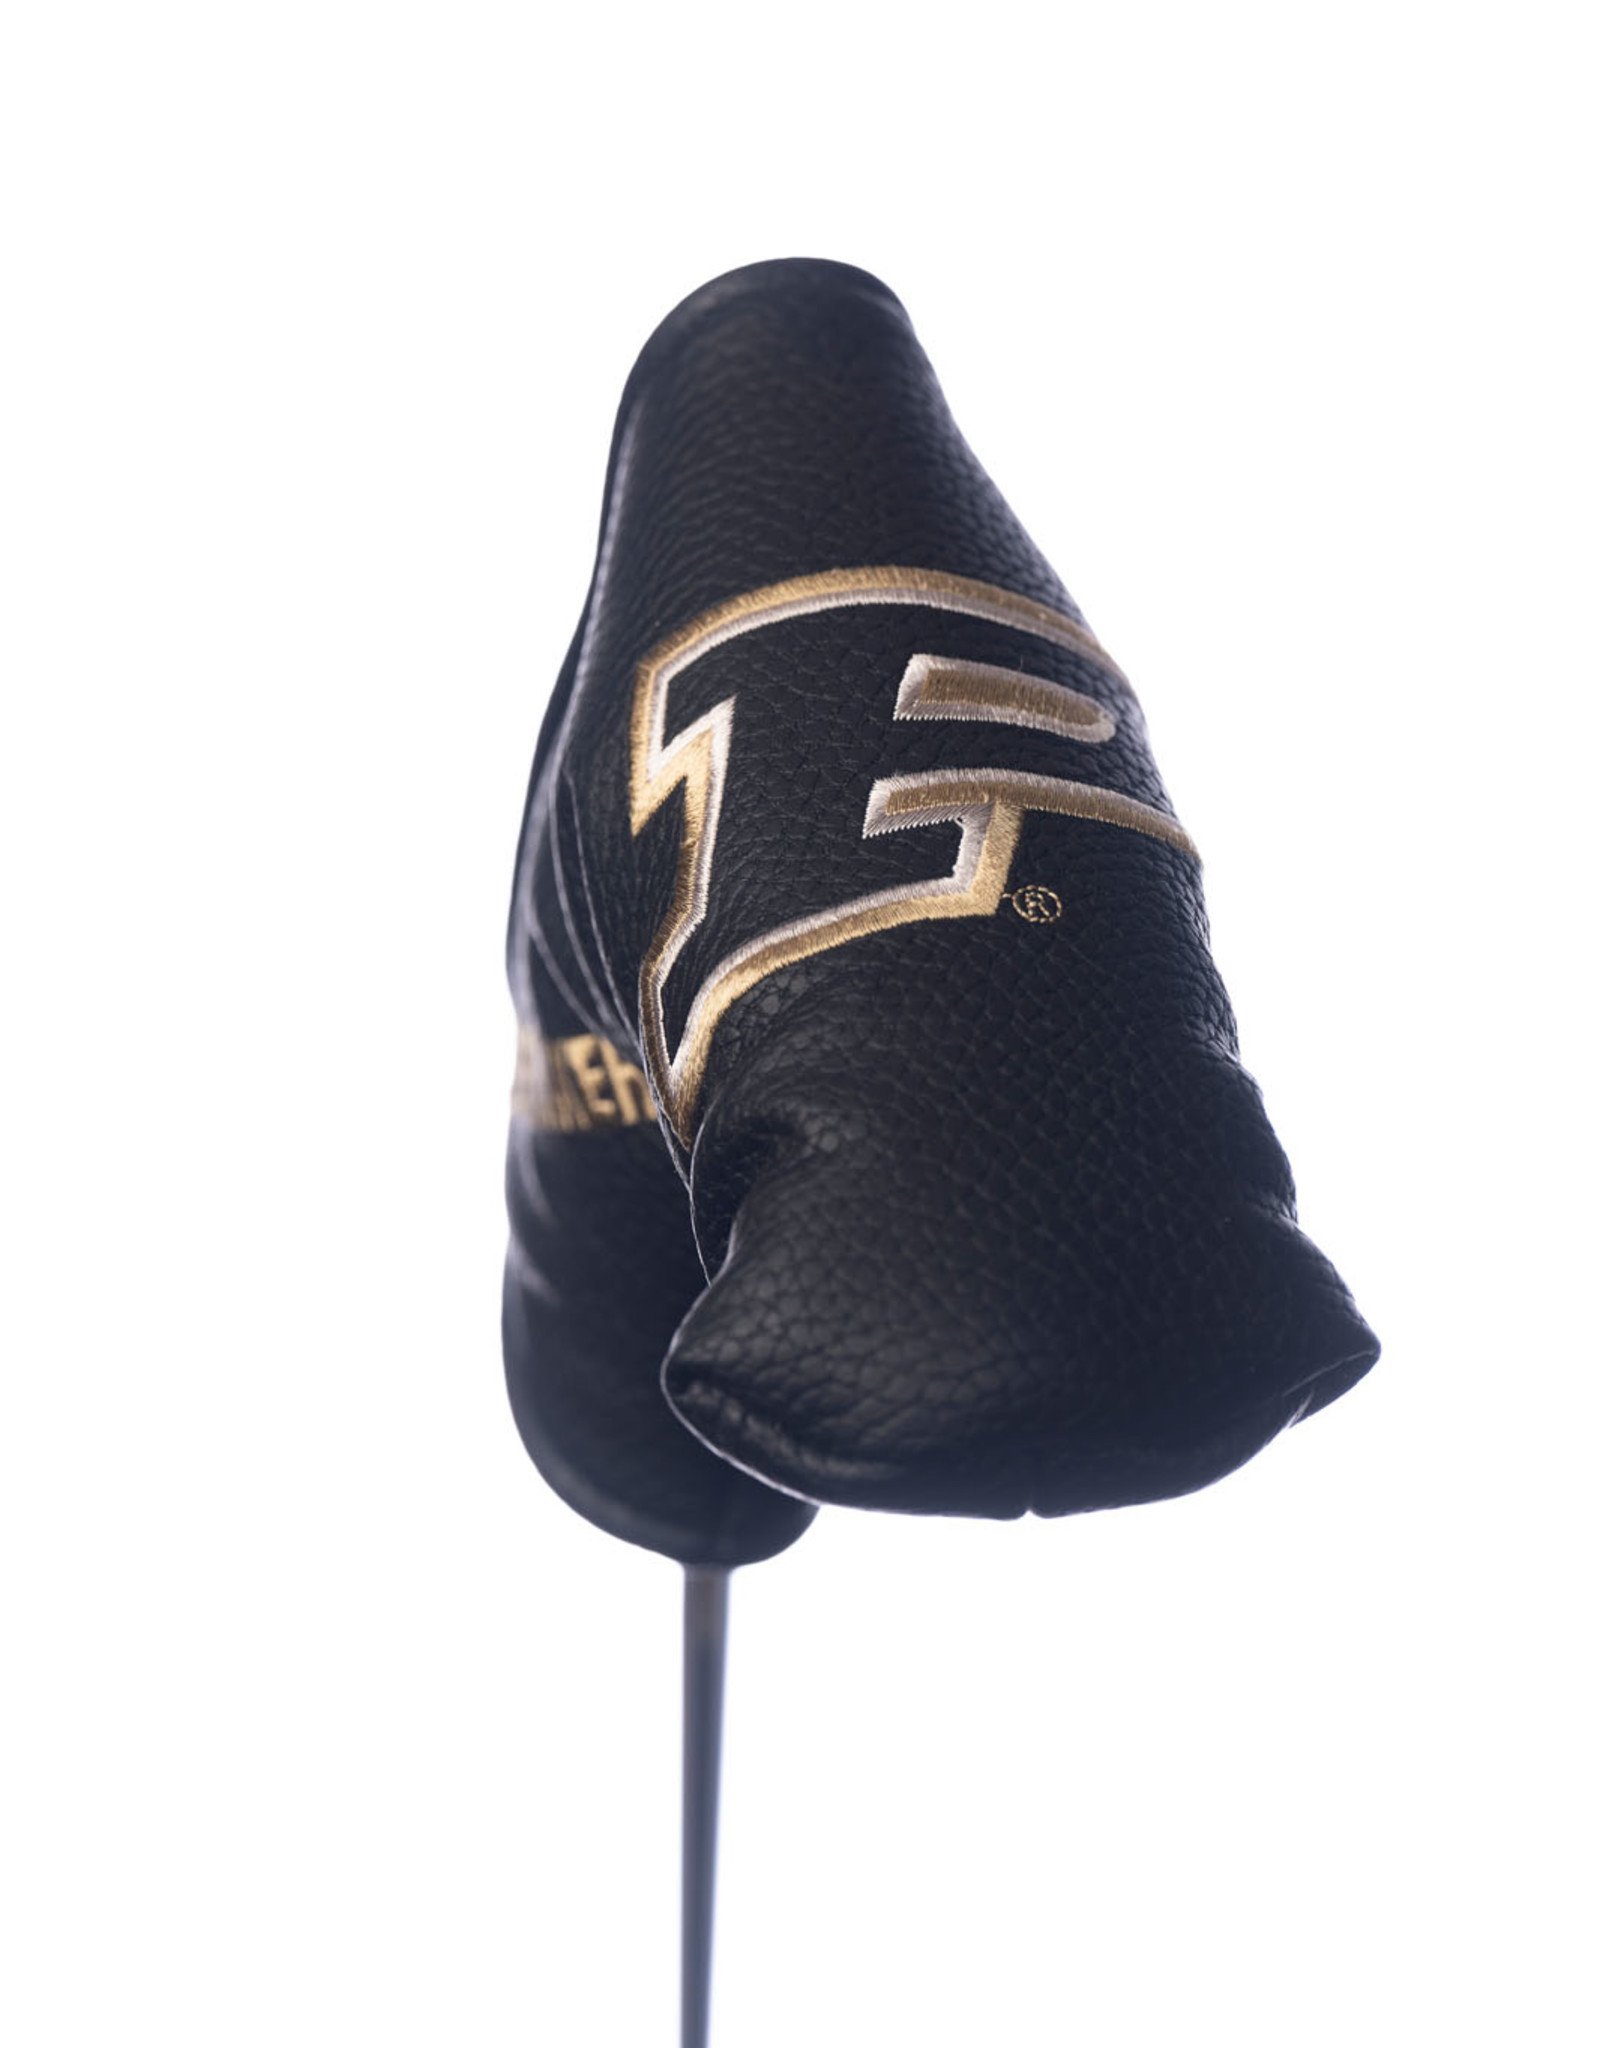 WINCRAFT PURDUE LEATHER PUTTER COVER (BLADE)